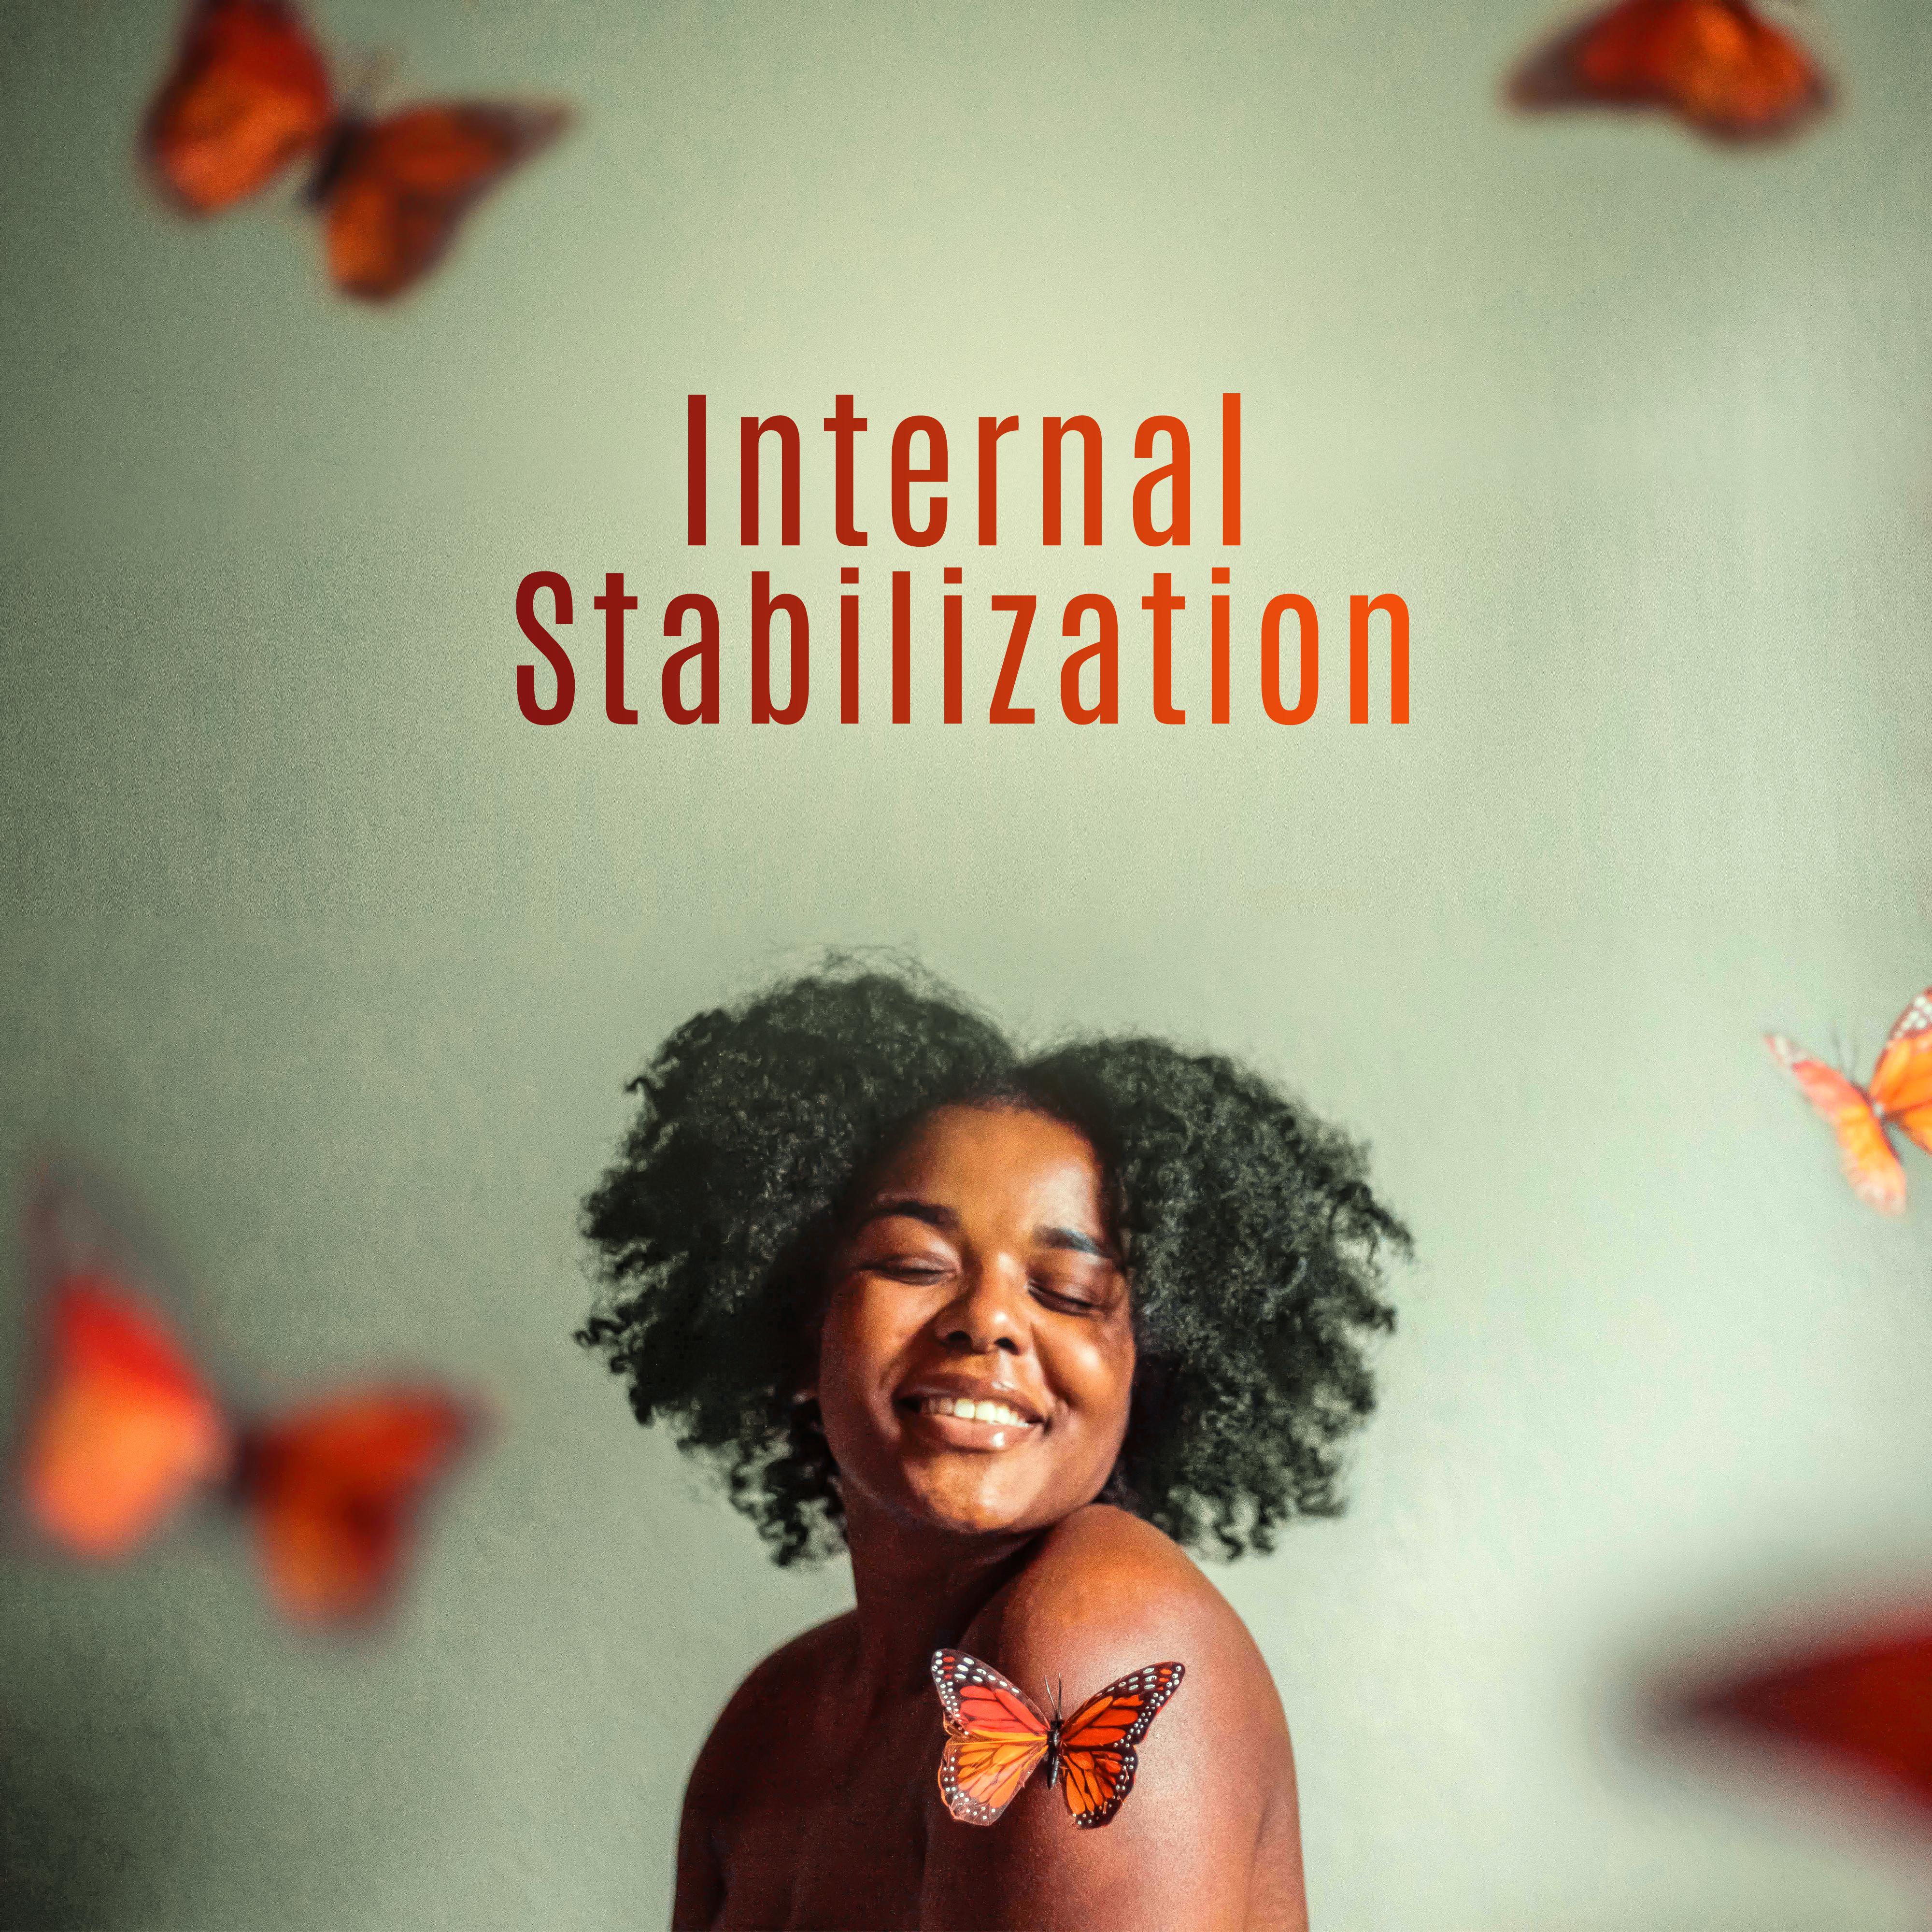 Internal Stabilization – 15 Songs that Will Calm you Down, Relax and Bring Relief